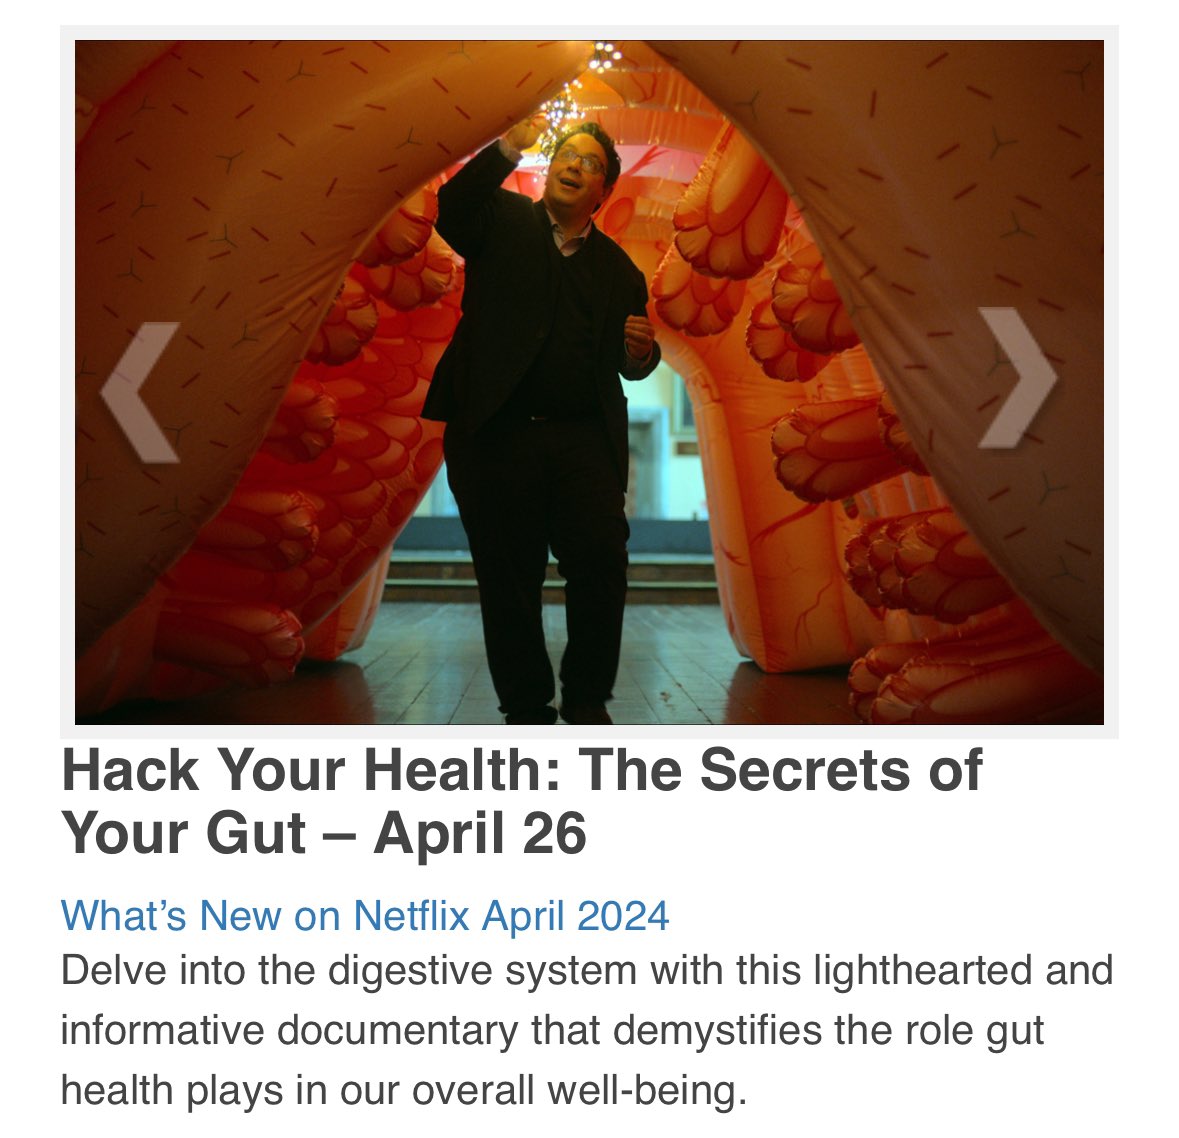 And there I am inside a giant gut… coming to @netflix April 26th